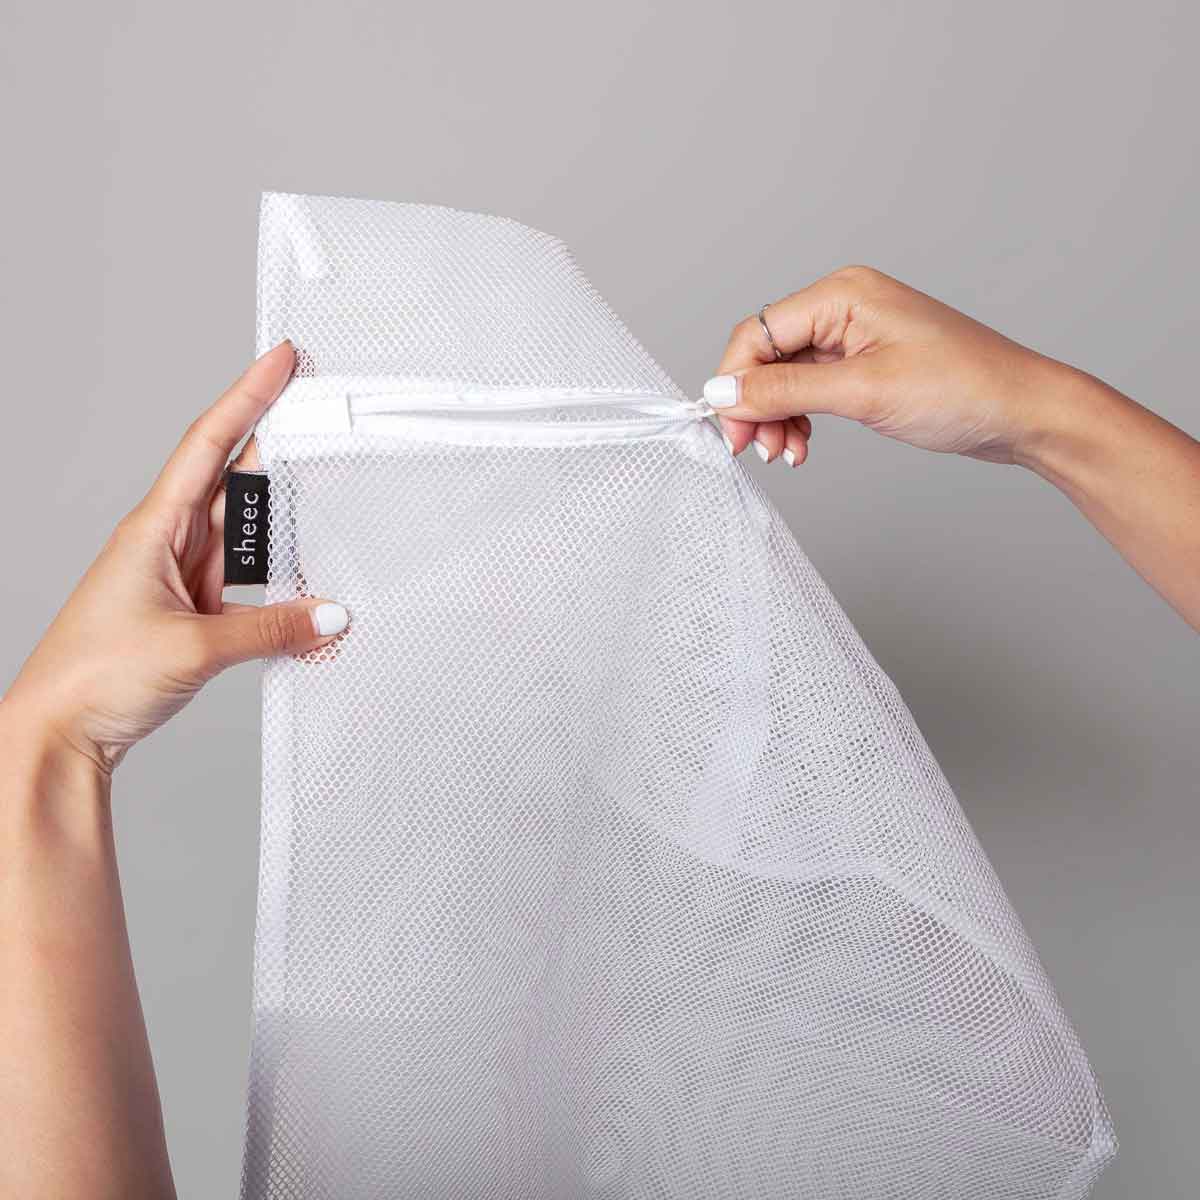 sheec accessories large mesh laundry bag with zippers for delicates